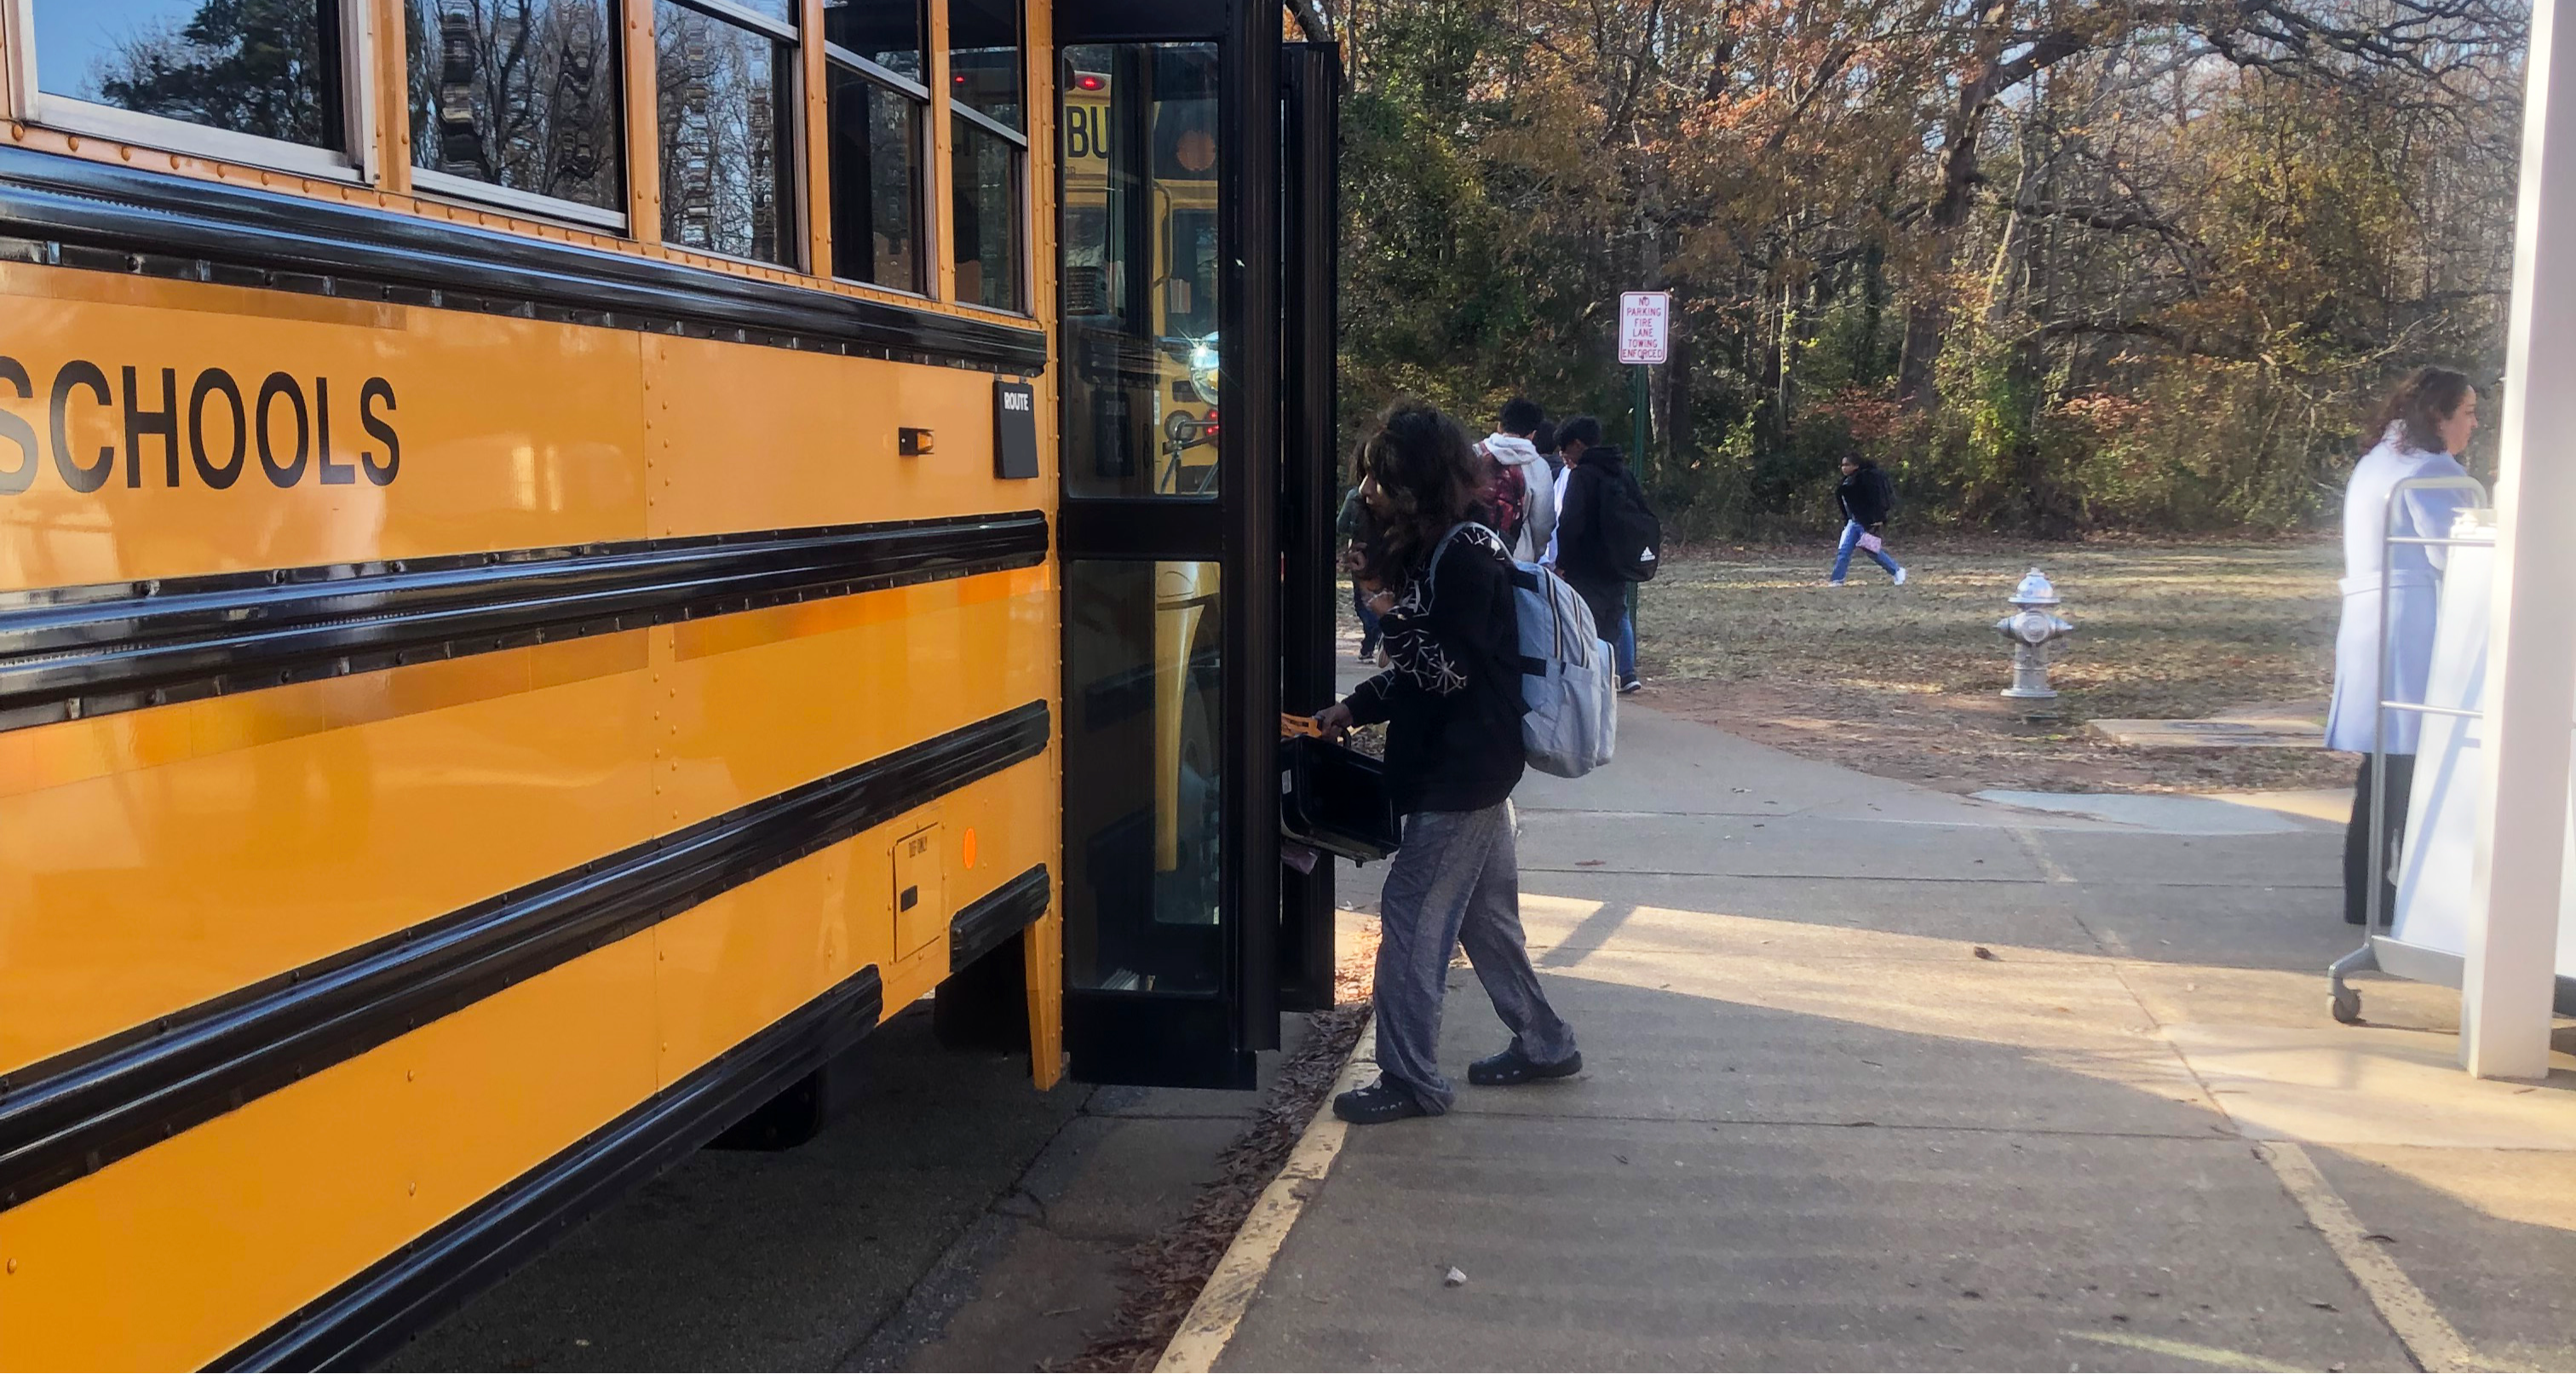 Students getting on school buses